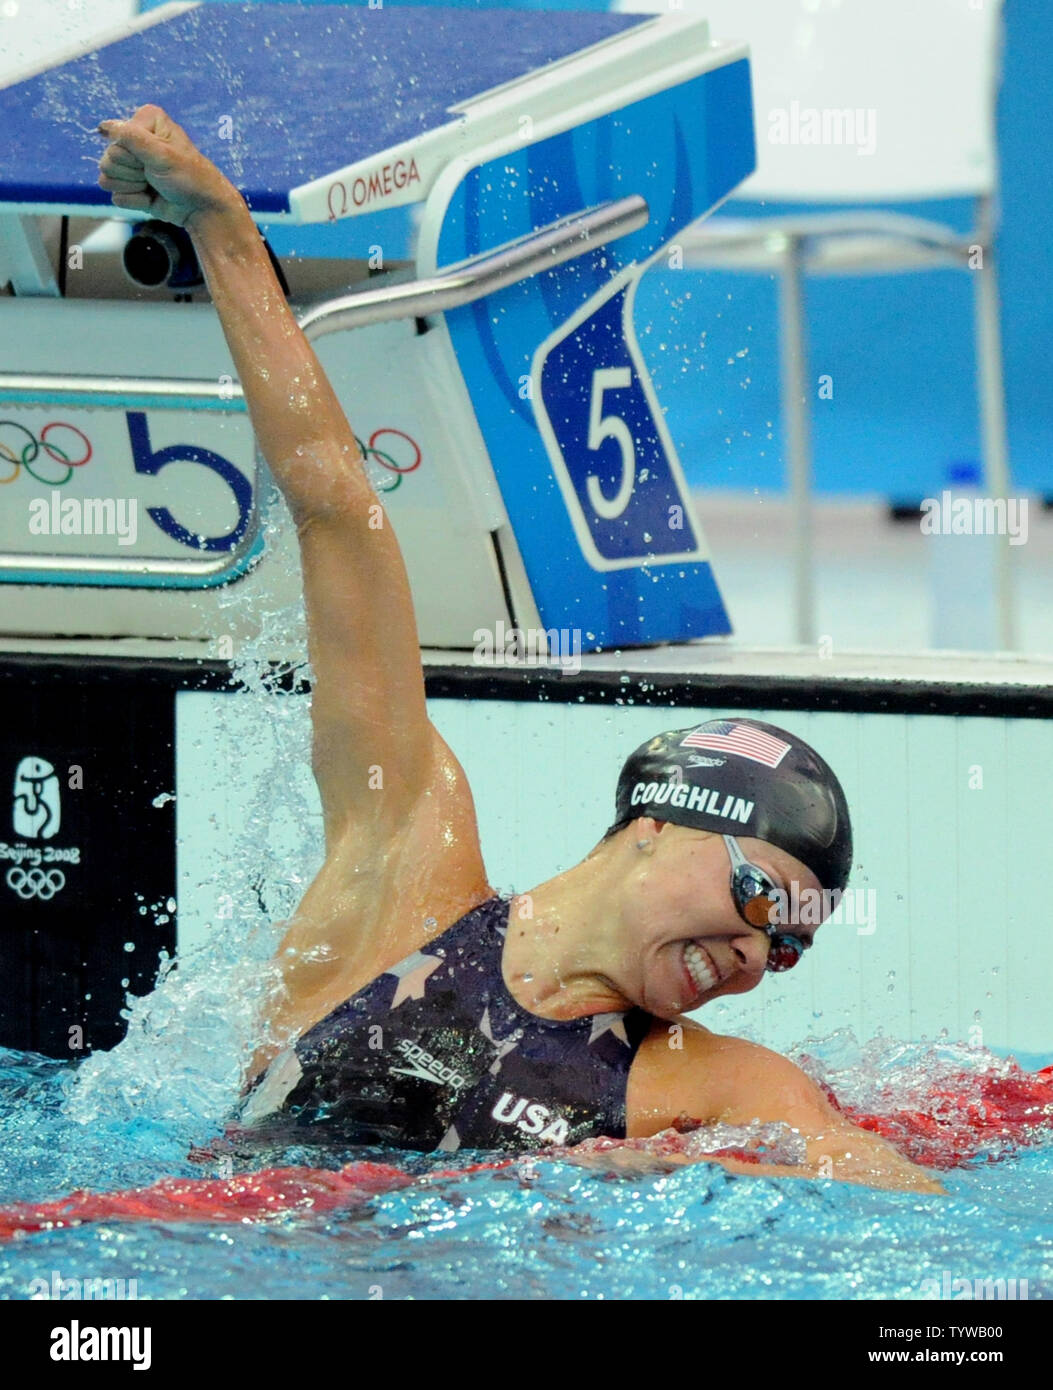 USA's Natalie Coughlin waves her arms in jubilation after she wins the gold in the Women's 100M Backstroke at the National Aquatics Center at the Summer Olympics in Beijing on August 12, 2008.  Coughlin's time was 58.96.   (UPI Photo/Pat Benic) Stock Photo